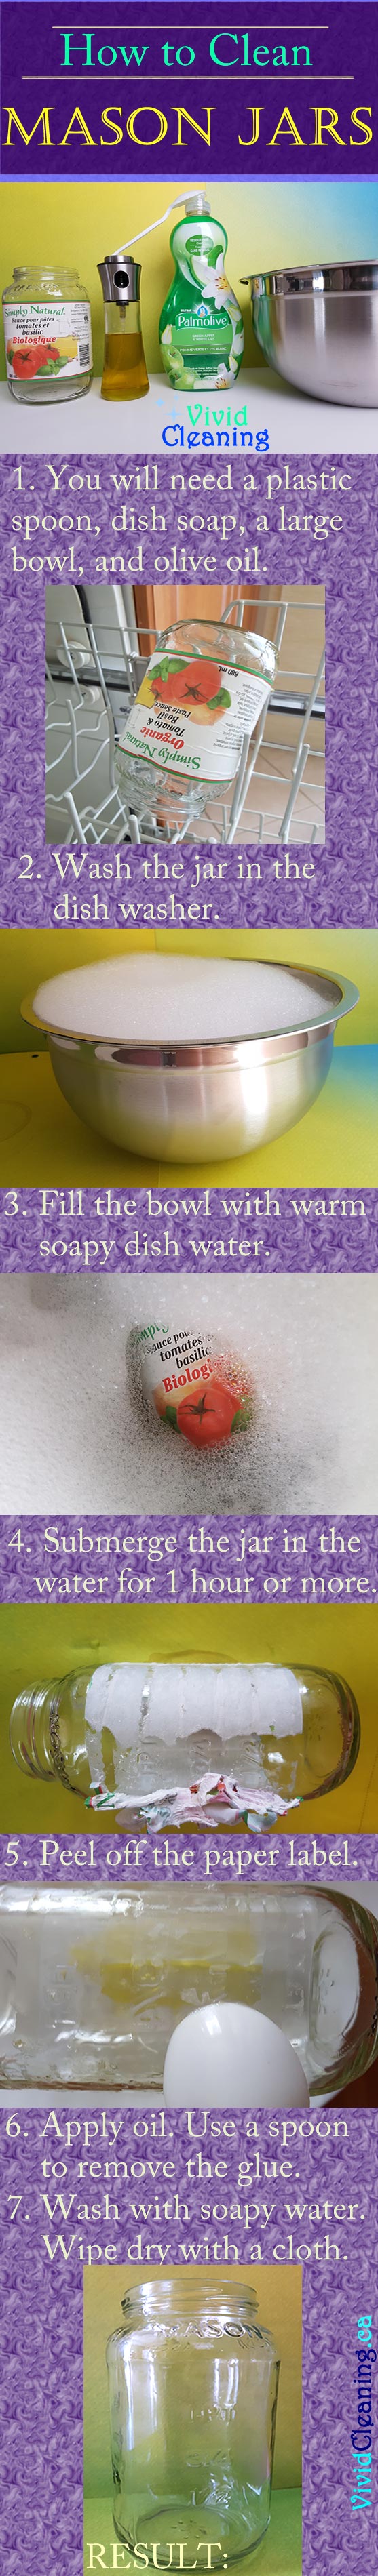 You will need a plastic spoon, olive oil, dish soap and a large bowl. First, wash the mason jar in the dish washer. This will help remove food remains. Fill a large bowl with warm soapy dish water. Submerge the mason jar in it and make sure that the label is fully submerged. Leave this for 1 hour or longer.